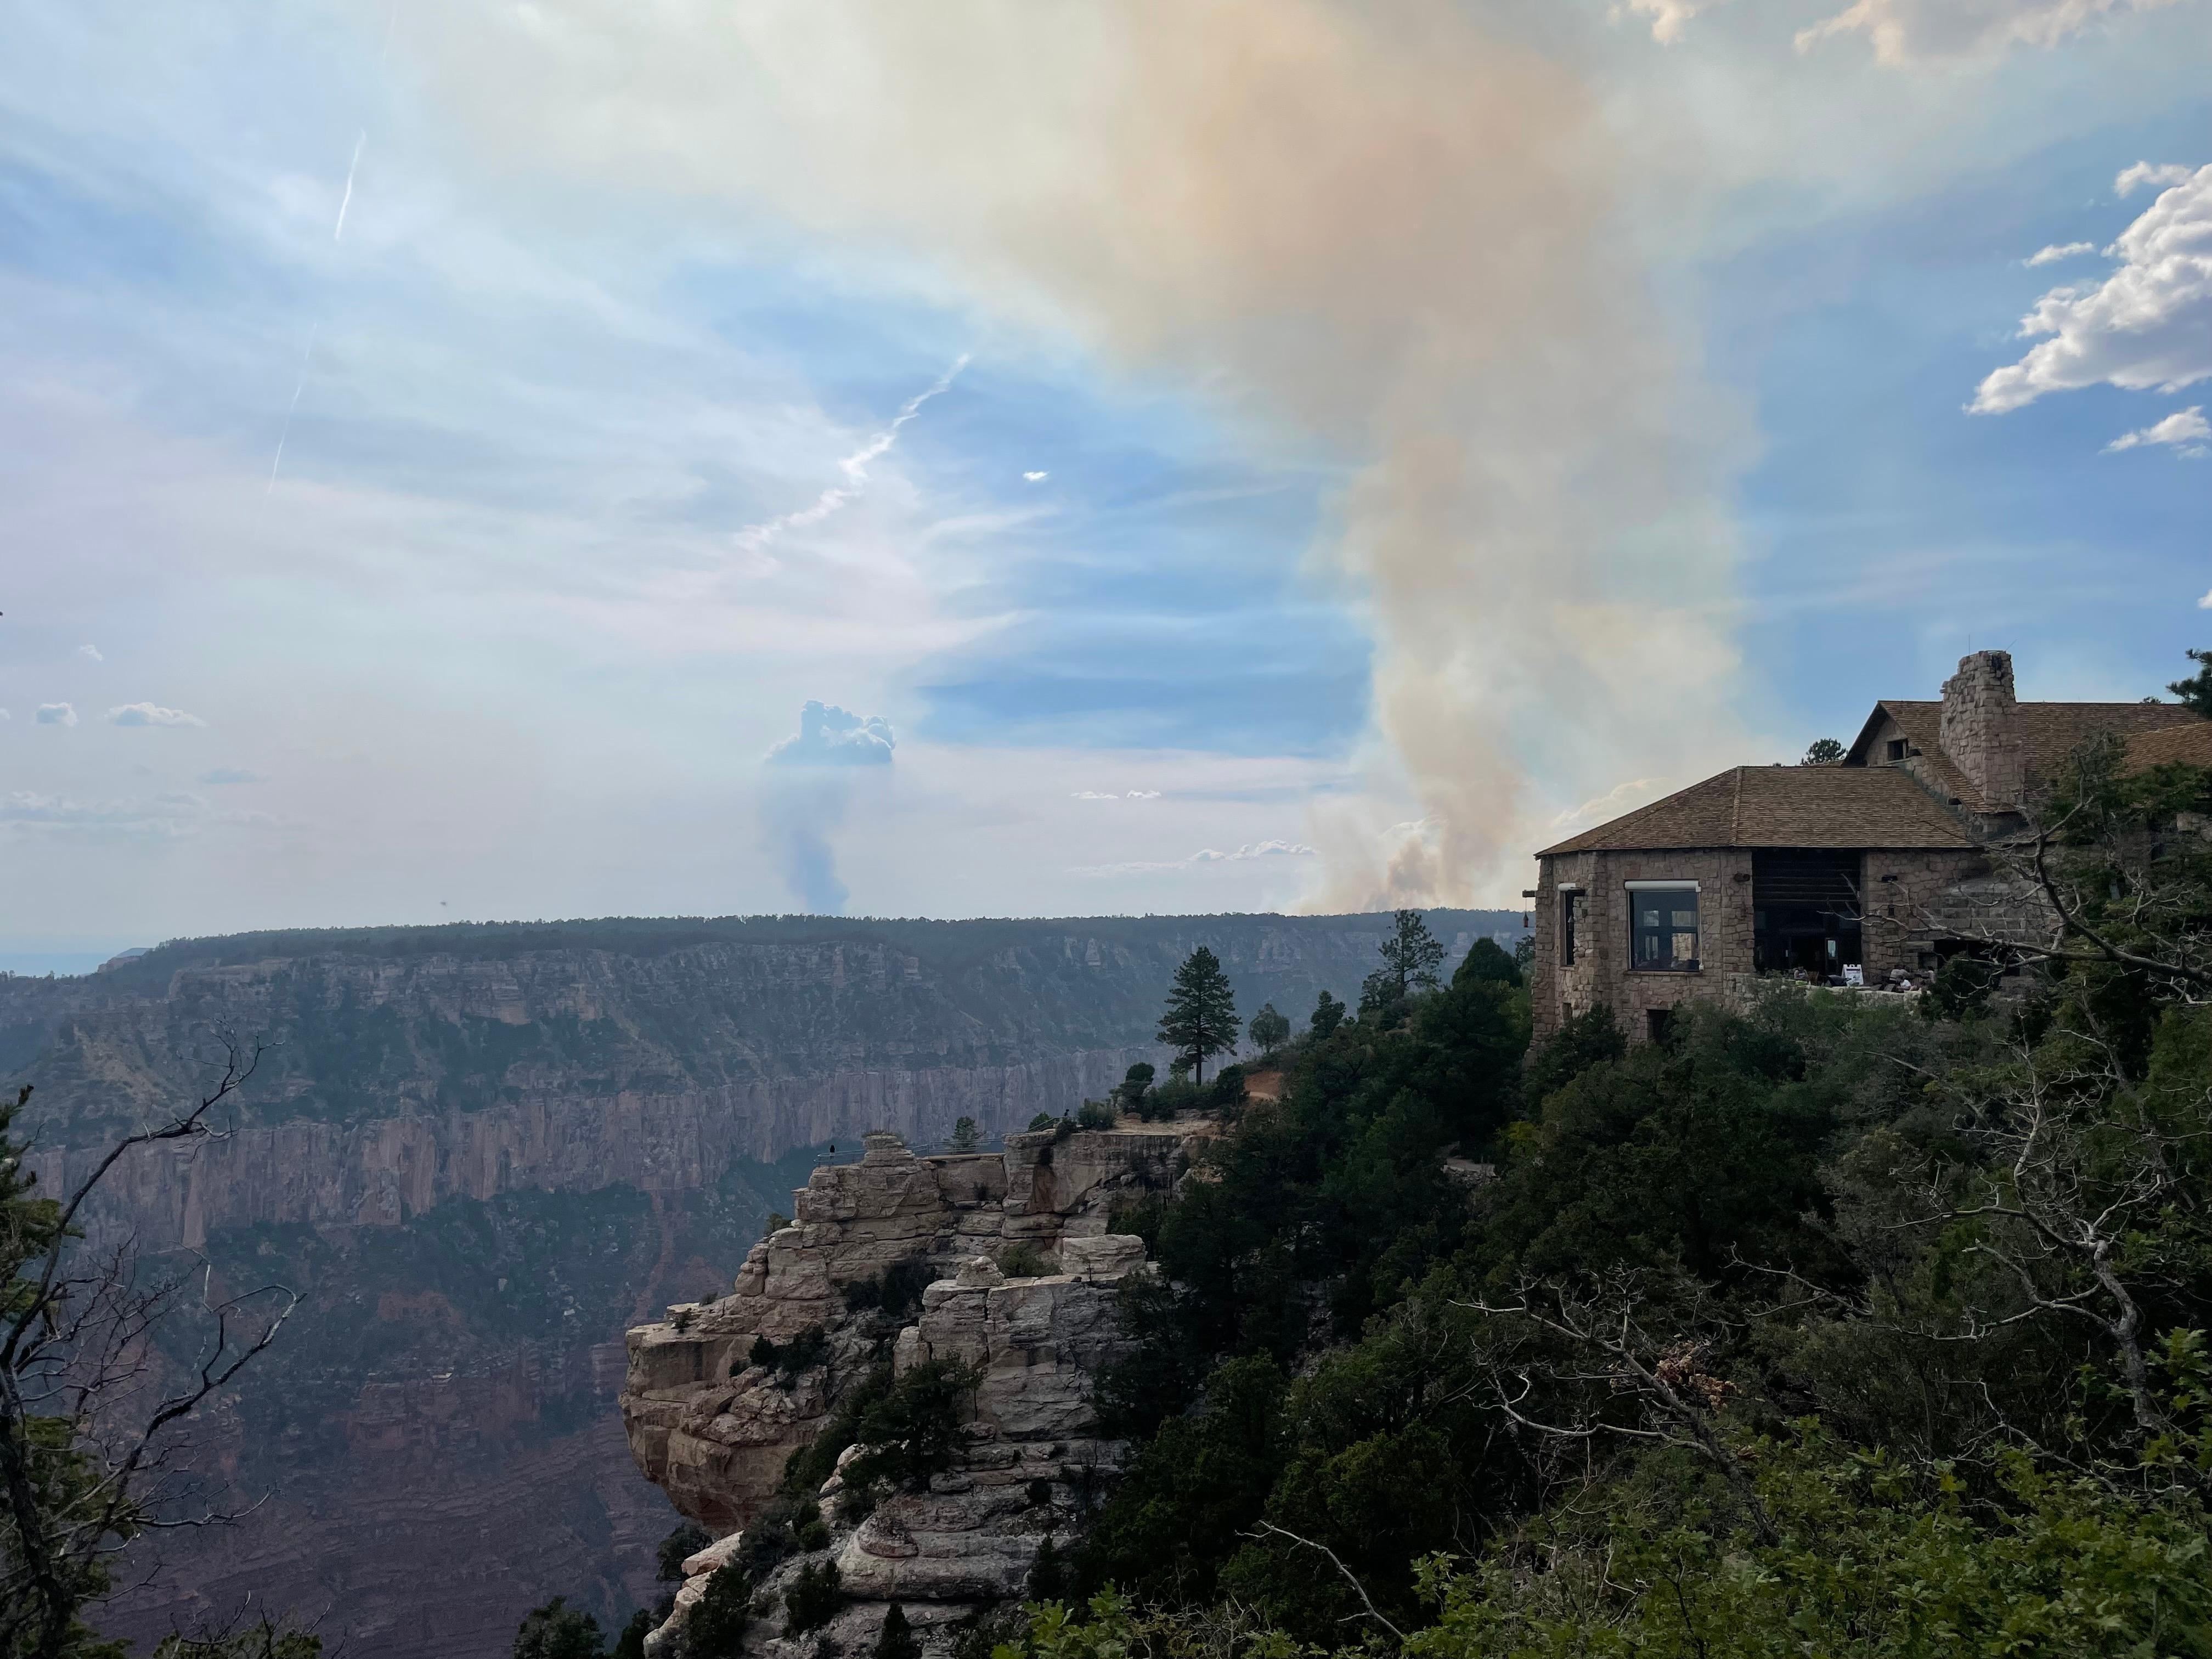 A plume of smoke is seen from the Grand Canyon North Rim Lodge on 7-21-2022